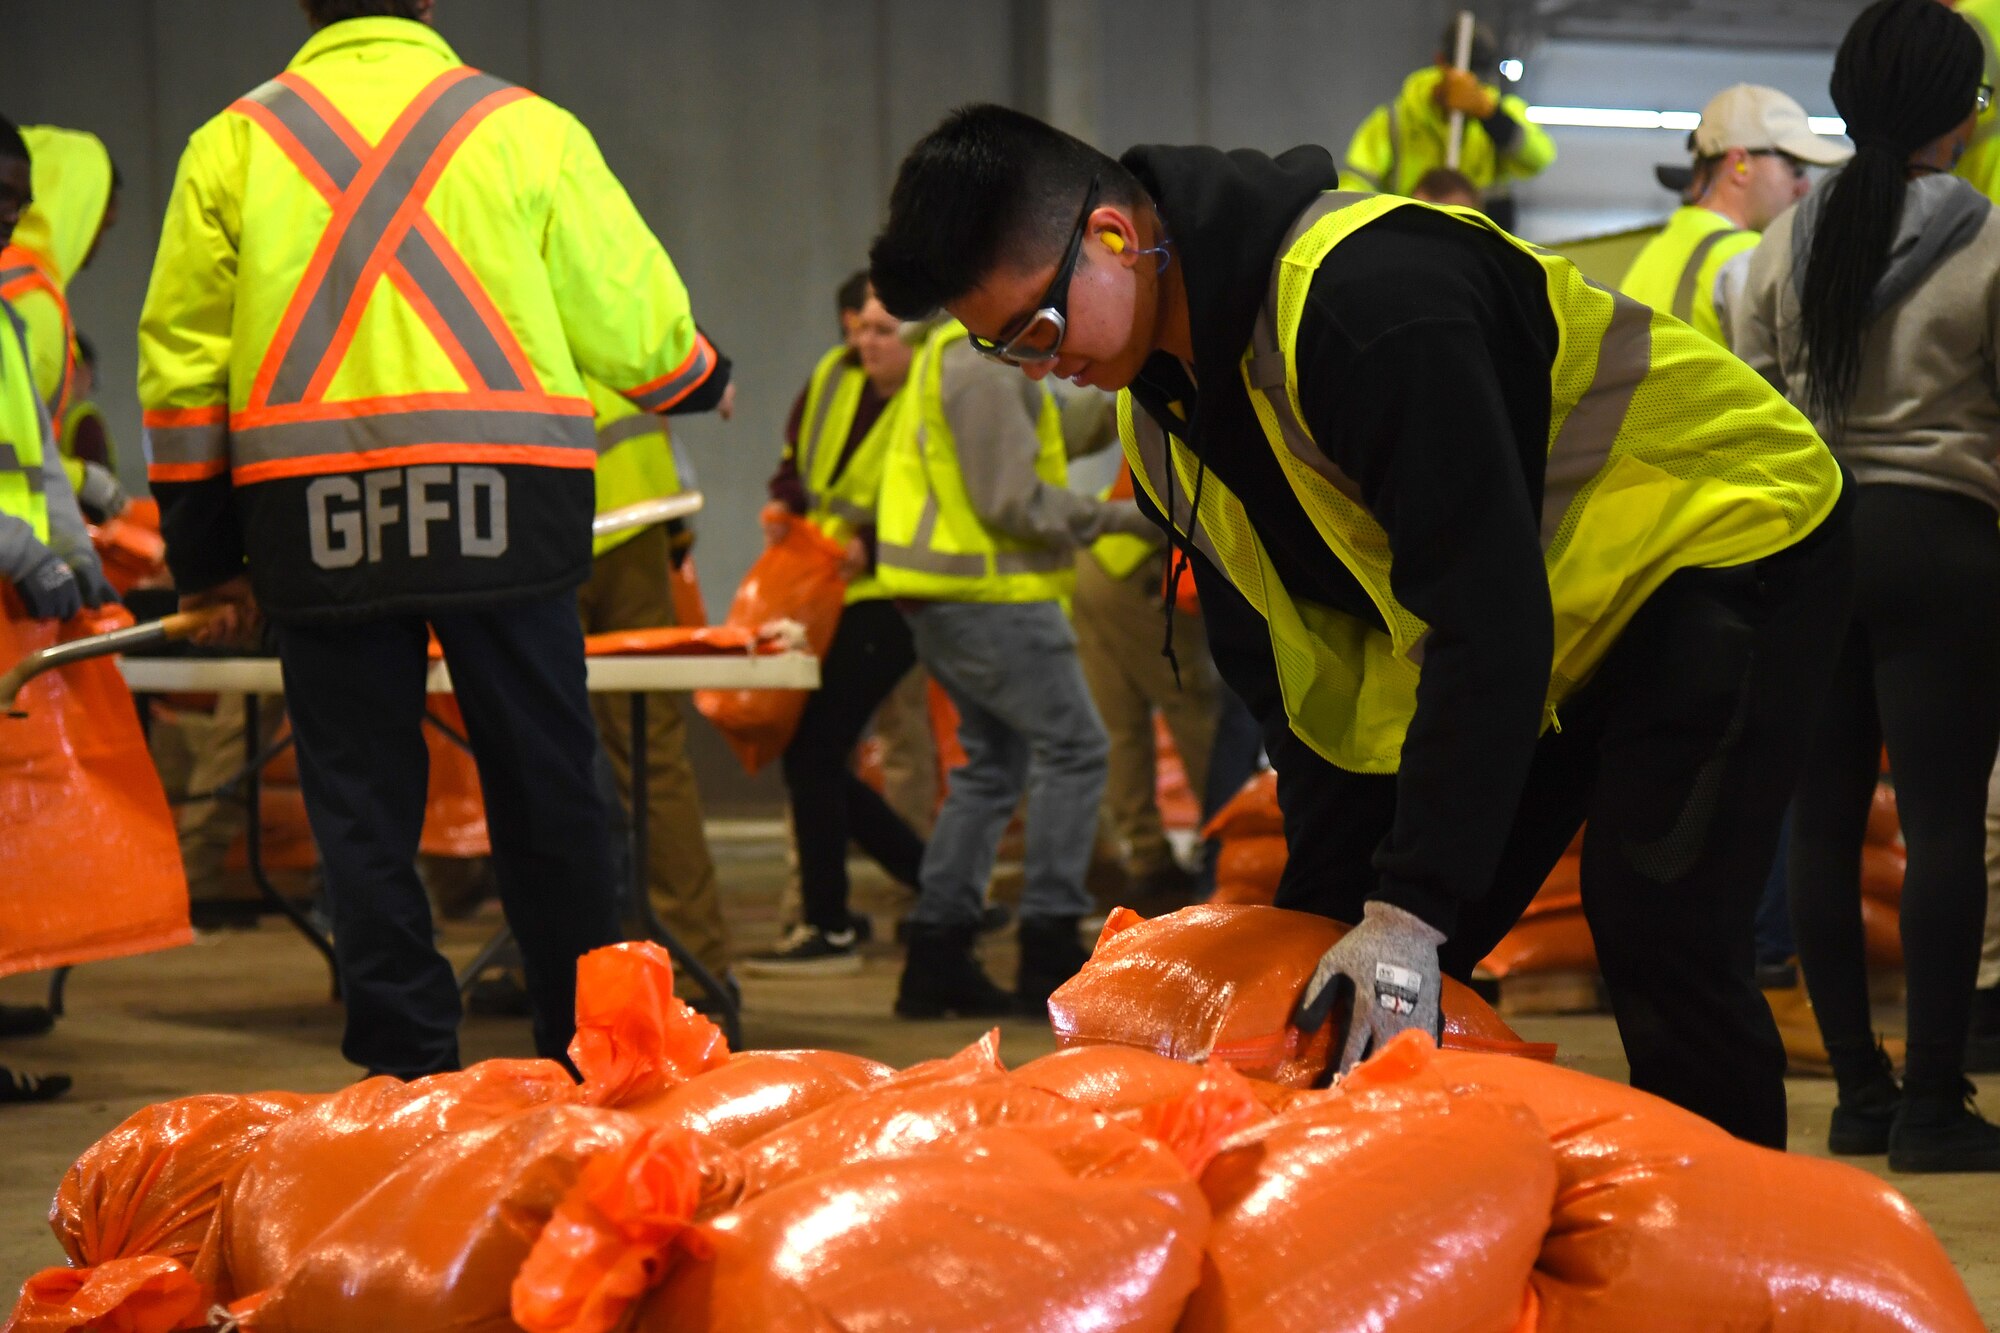 Airman 1st Class Ninghui Fang, 319th Force Support Squadron food services apprentice, stacks a completed sandbag onto a pallet during a sandbag stockpile volunteer event March 28, 2019, in Grand Forks, North Dakota. Nearly 60 Grand Forks Air Force Base members worked together to fill several thousand sandbags in preparation of expected flooding. (U.S. Air Force photo by Senior Airman Elora J. Martinez)